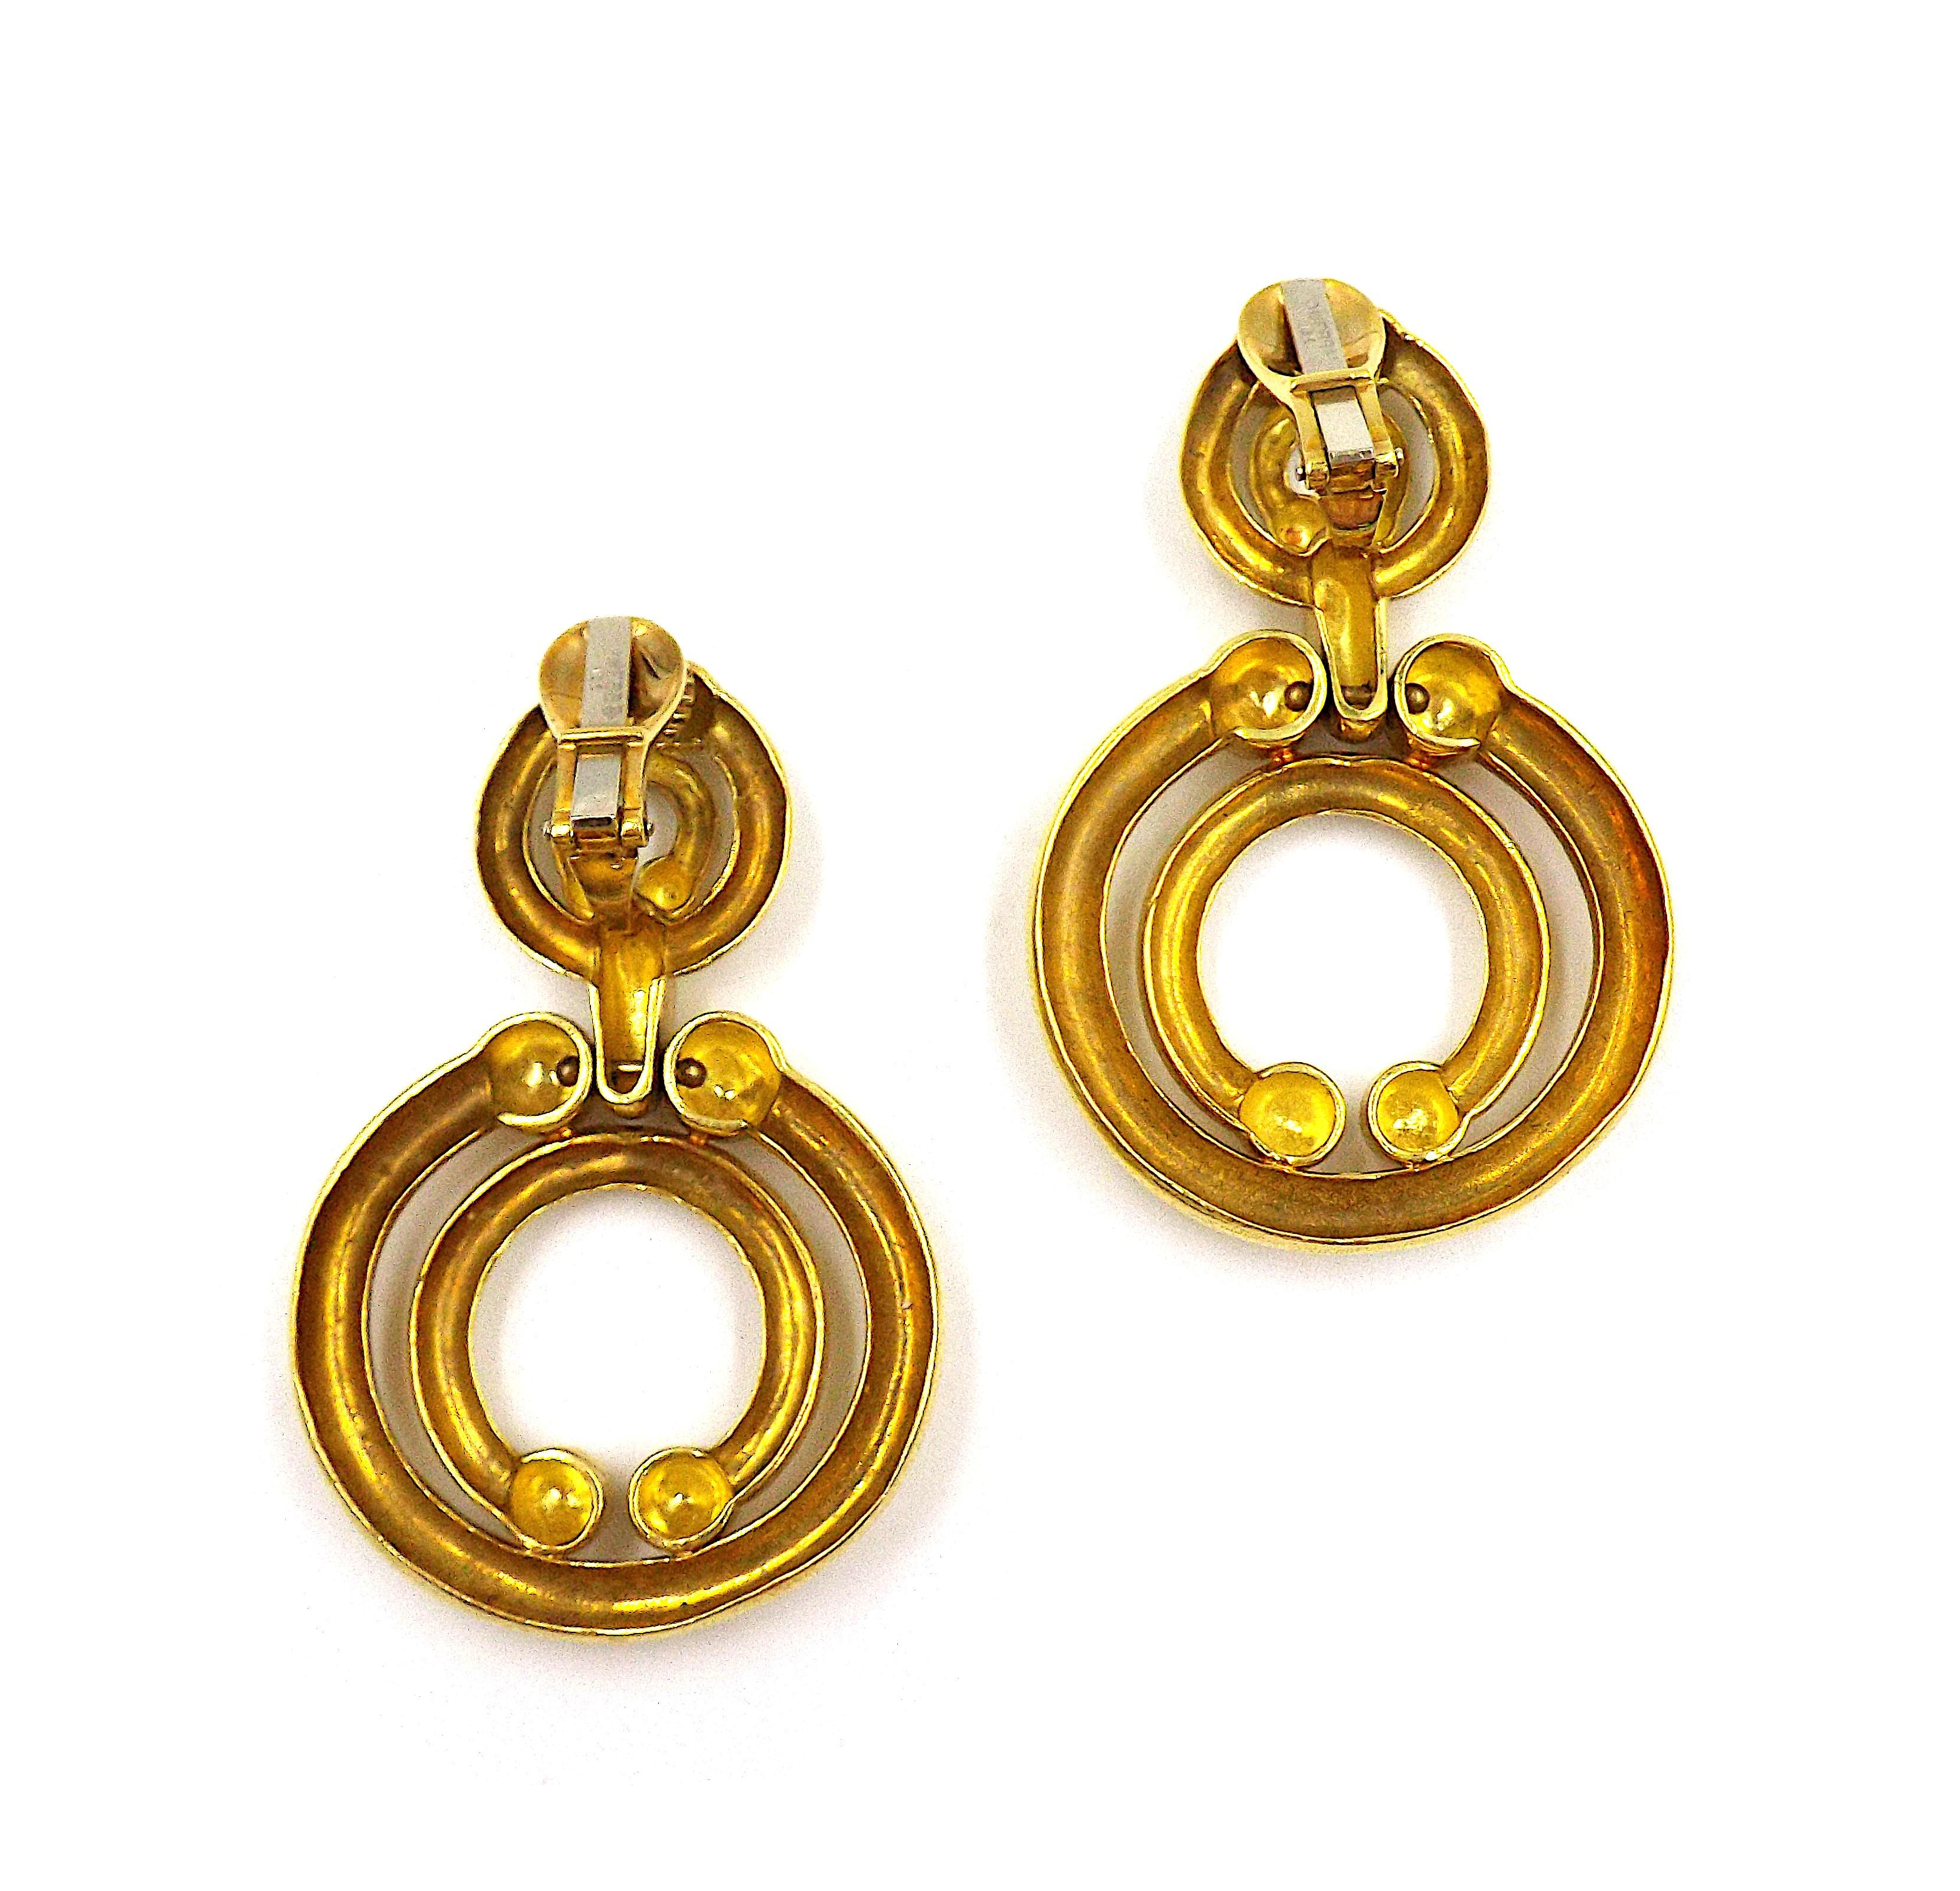 A pair of elegant pendant earrings by David Webb performed in 18K yellow gold, featuring a scroll design. Signed Webb, stamped 18K. Length is approx. 2.25